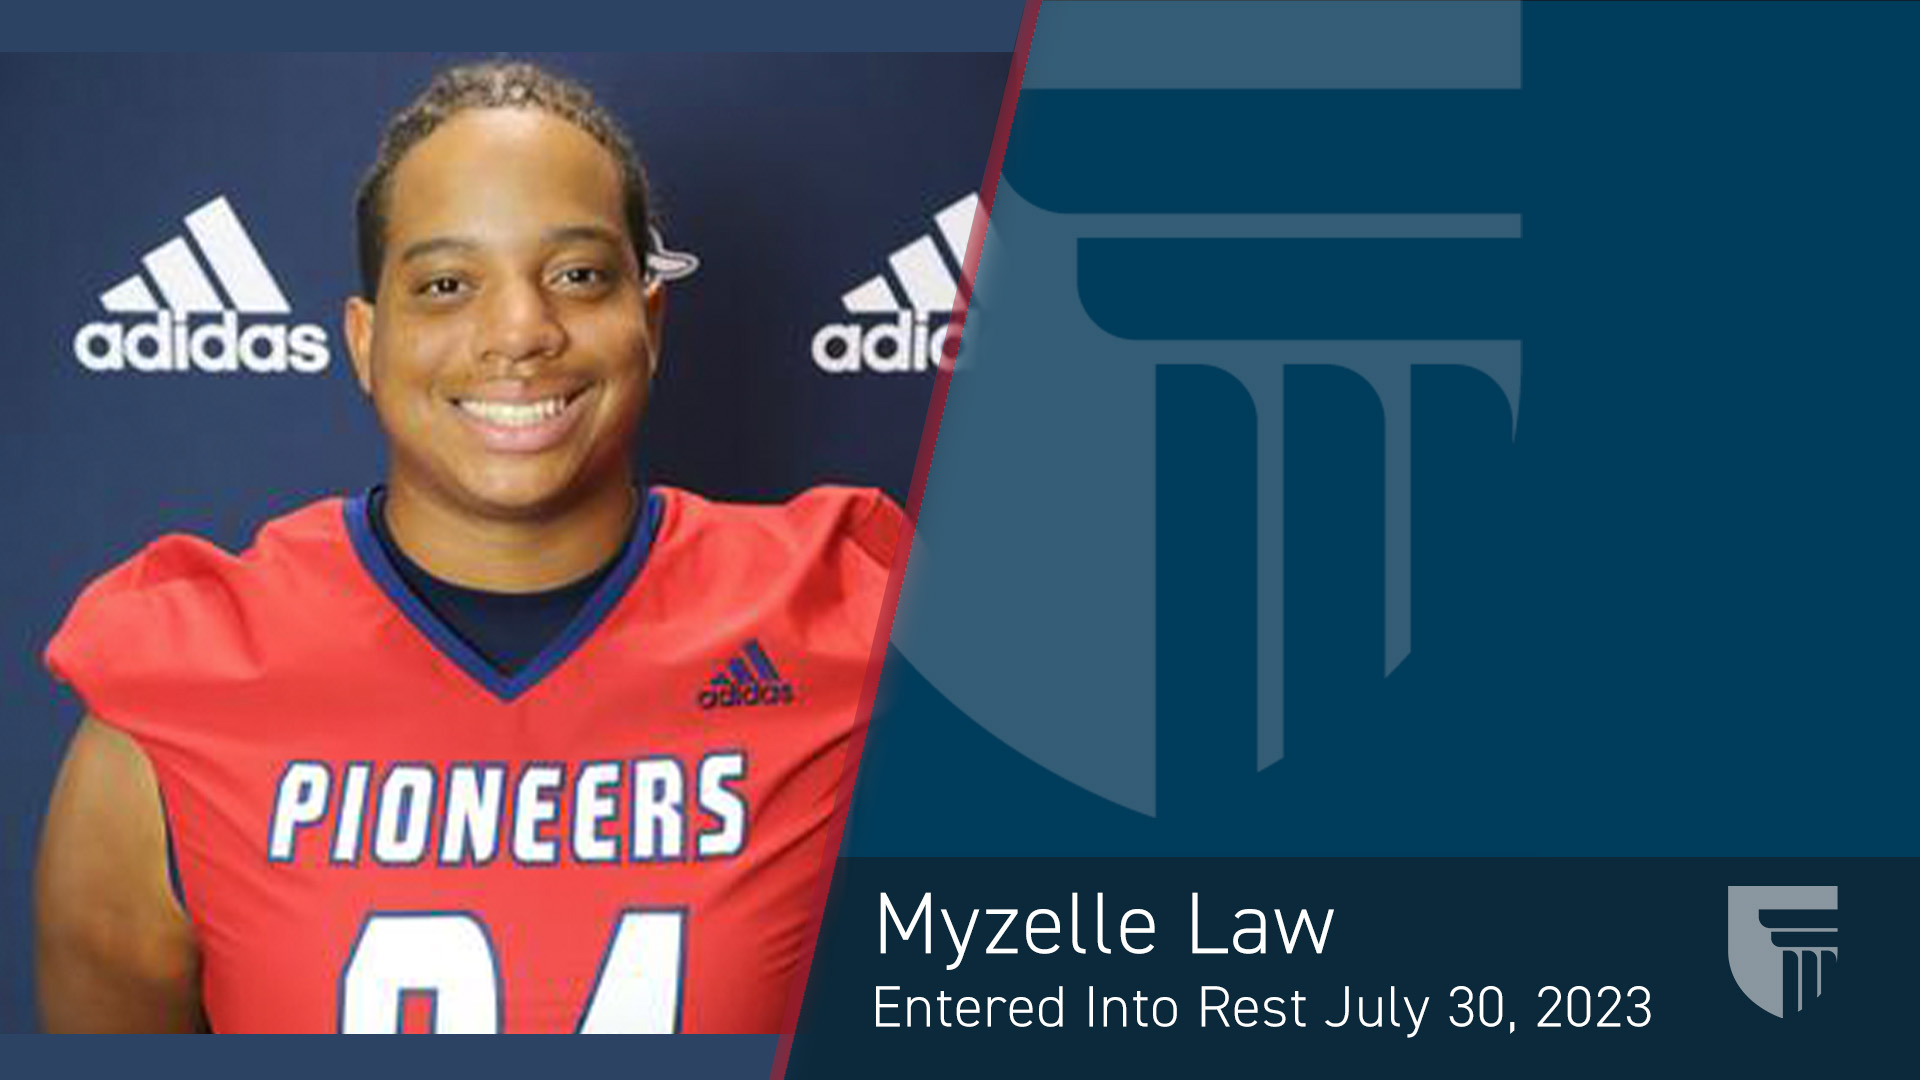 Myzelle Law